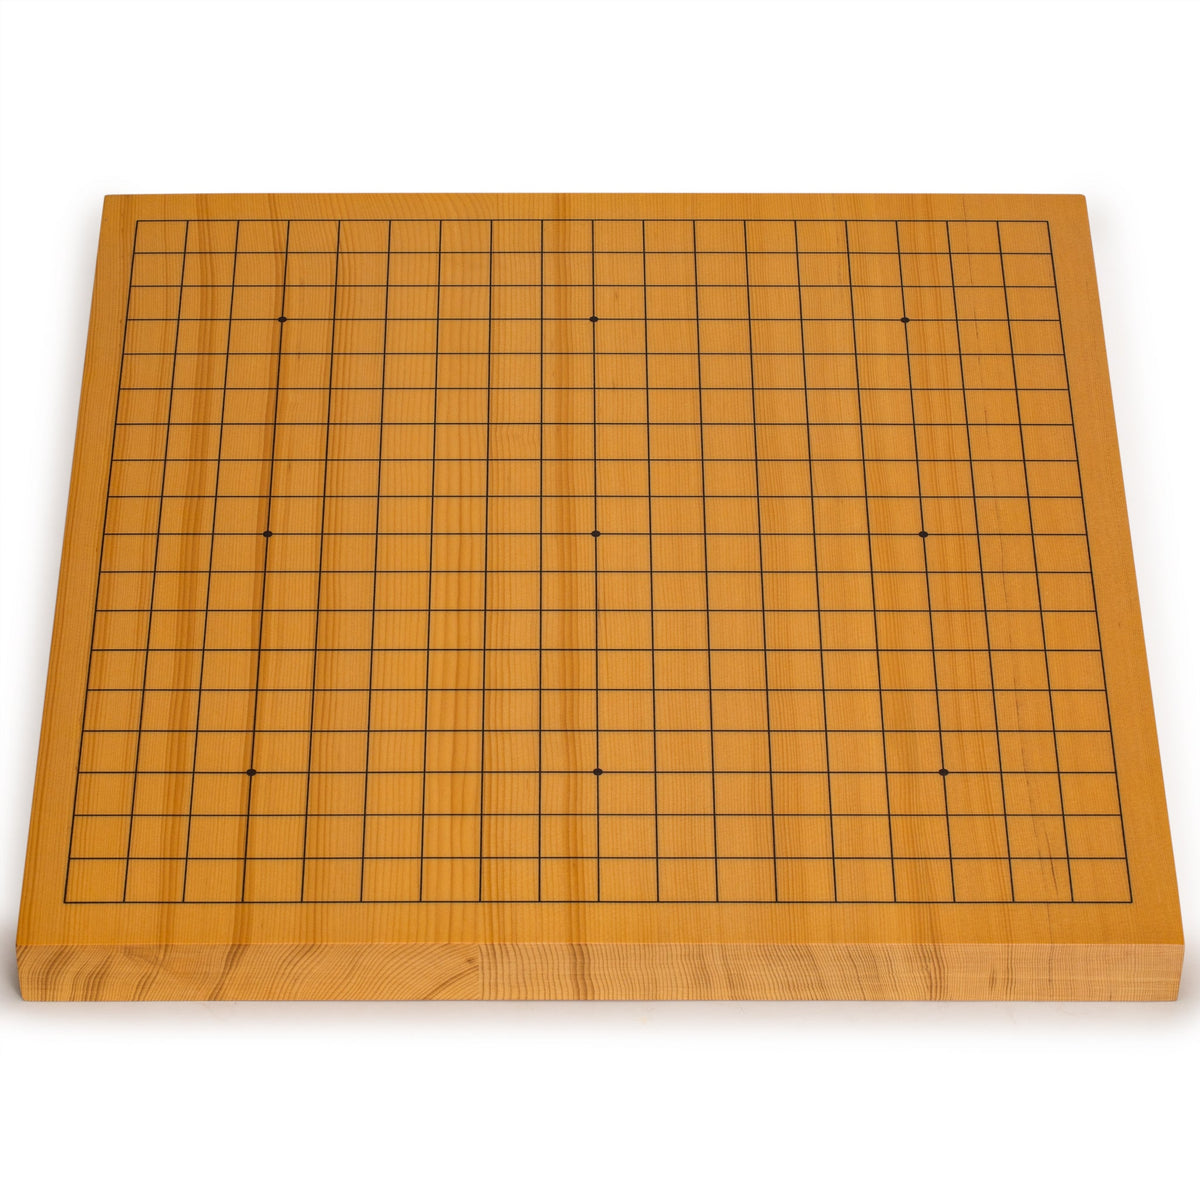 Yellow Mountain Imports Go Japanese Game Board (Goban), Shin Kaya Wood with Double Convex Glass Stones Jangstone & Bamboo Bowls - 1.2 inch